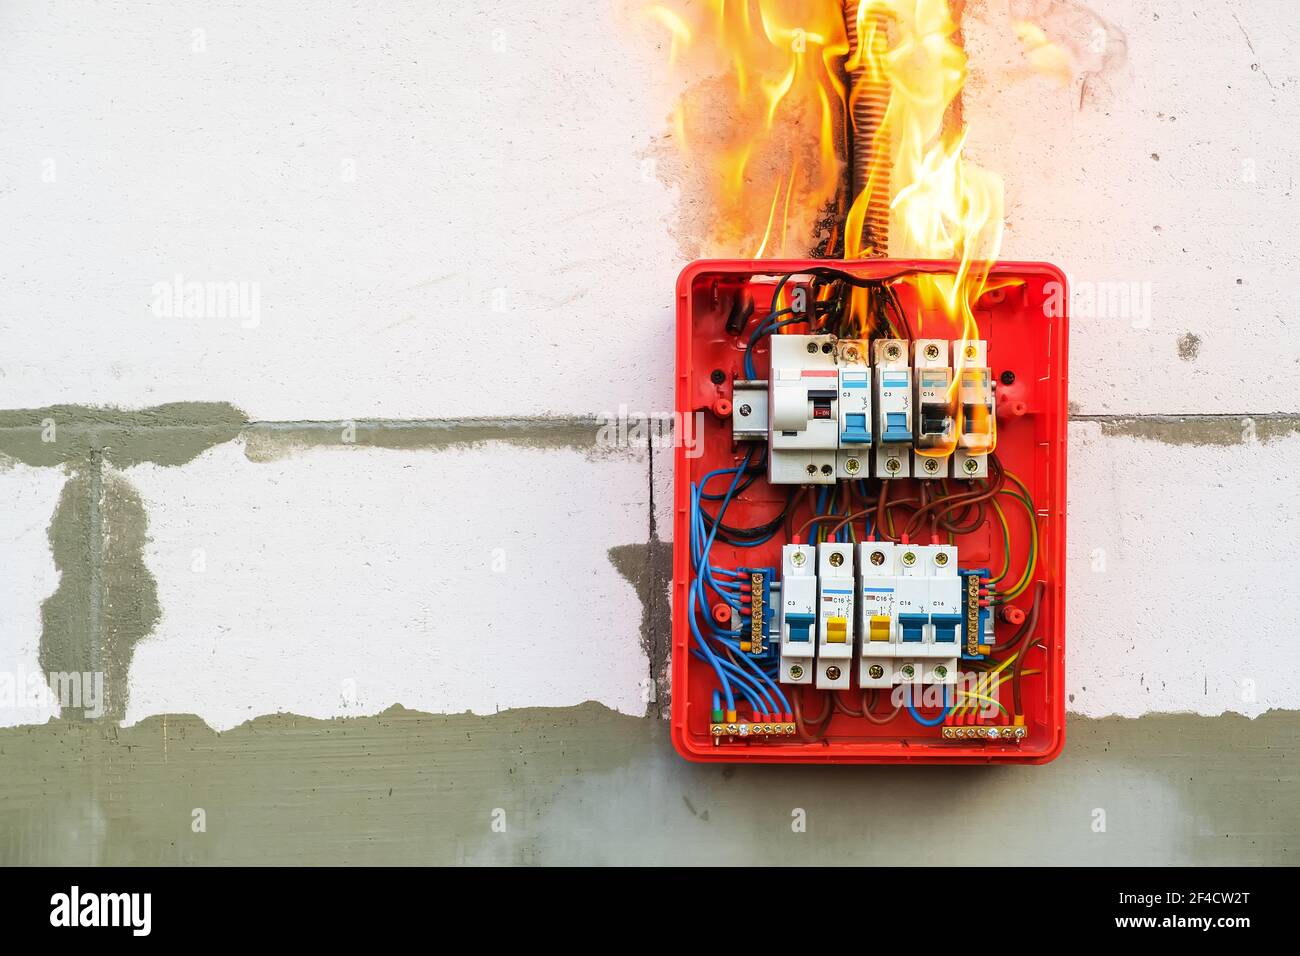 Burning switchboard from overload or short circuit on wall Stock Photo